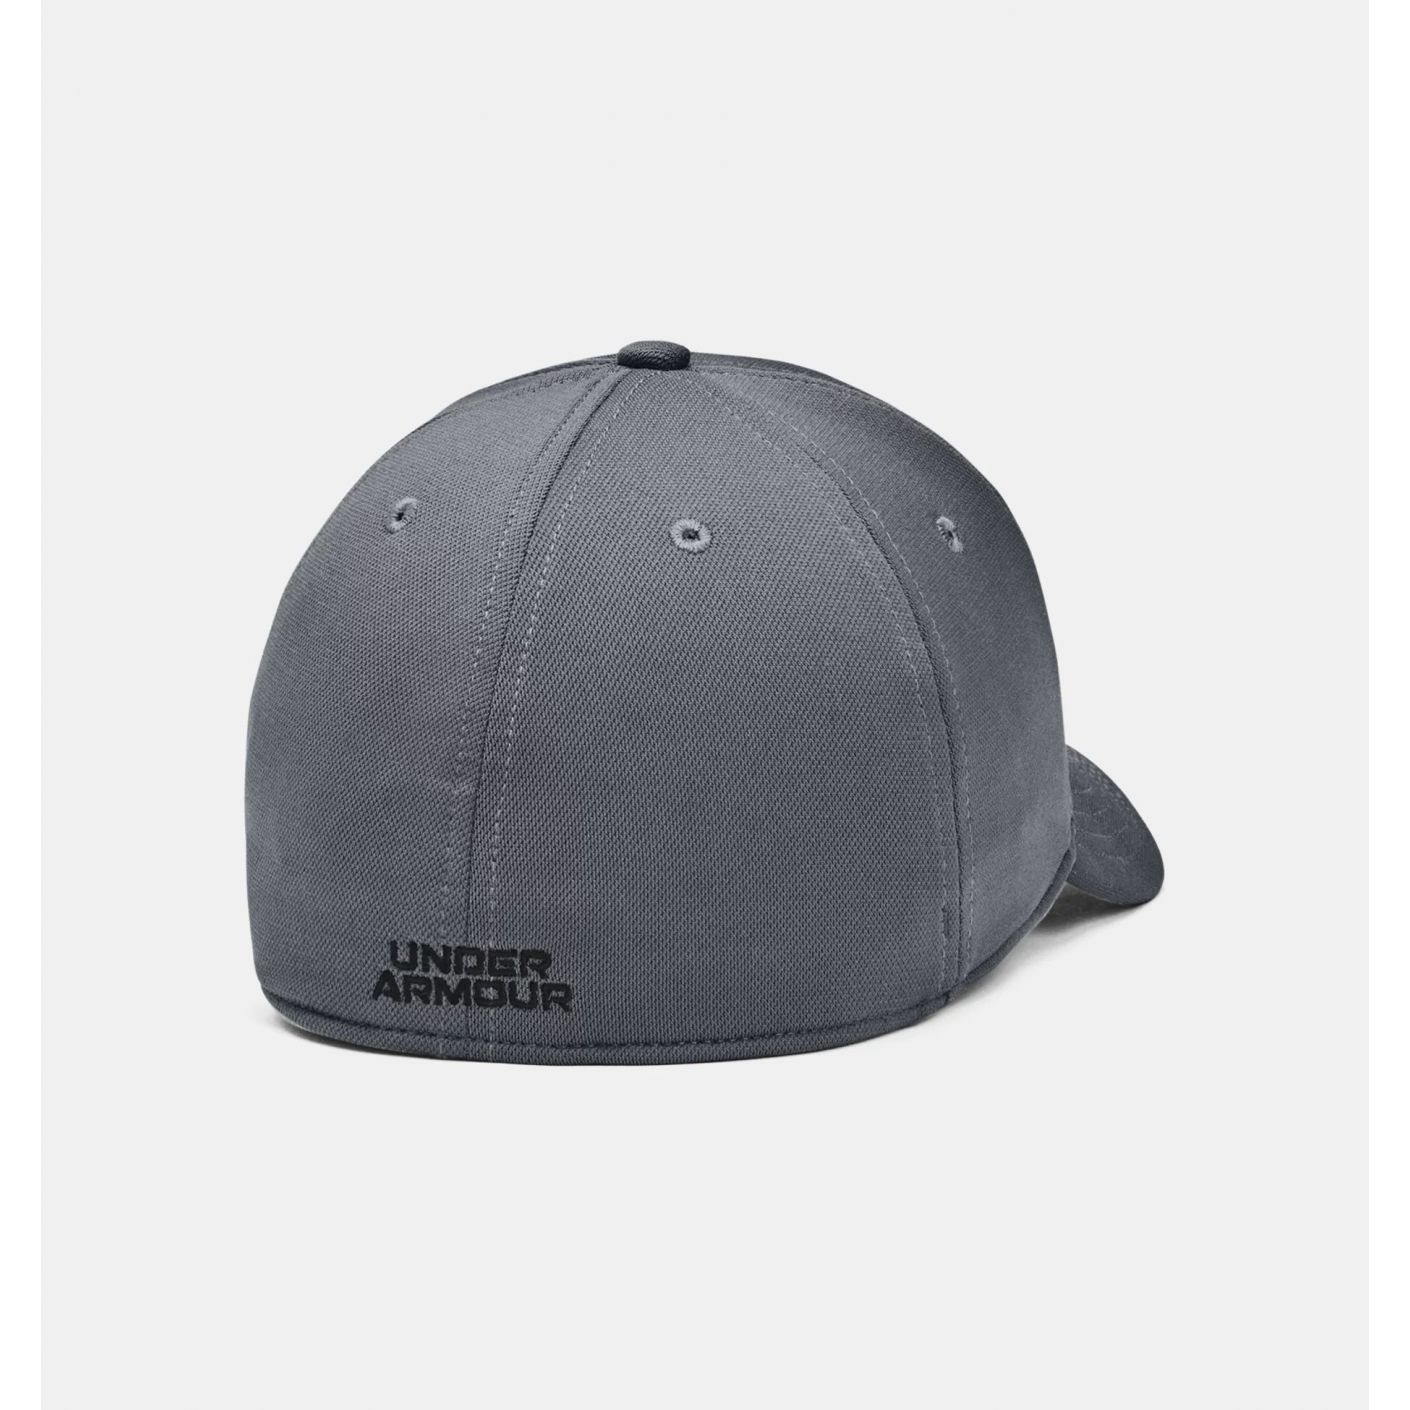 Under Armour Cappellino Blitzing Pitch Gray/Black